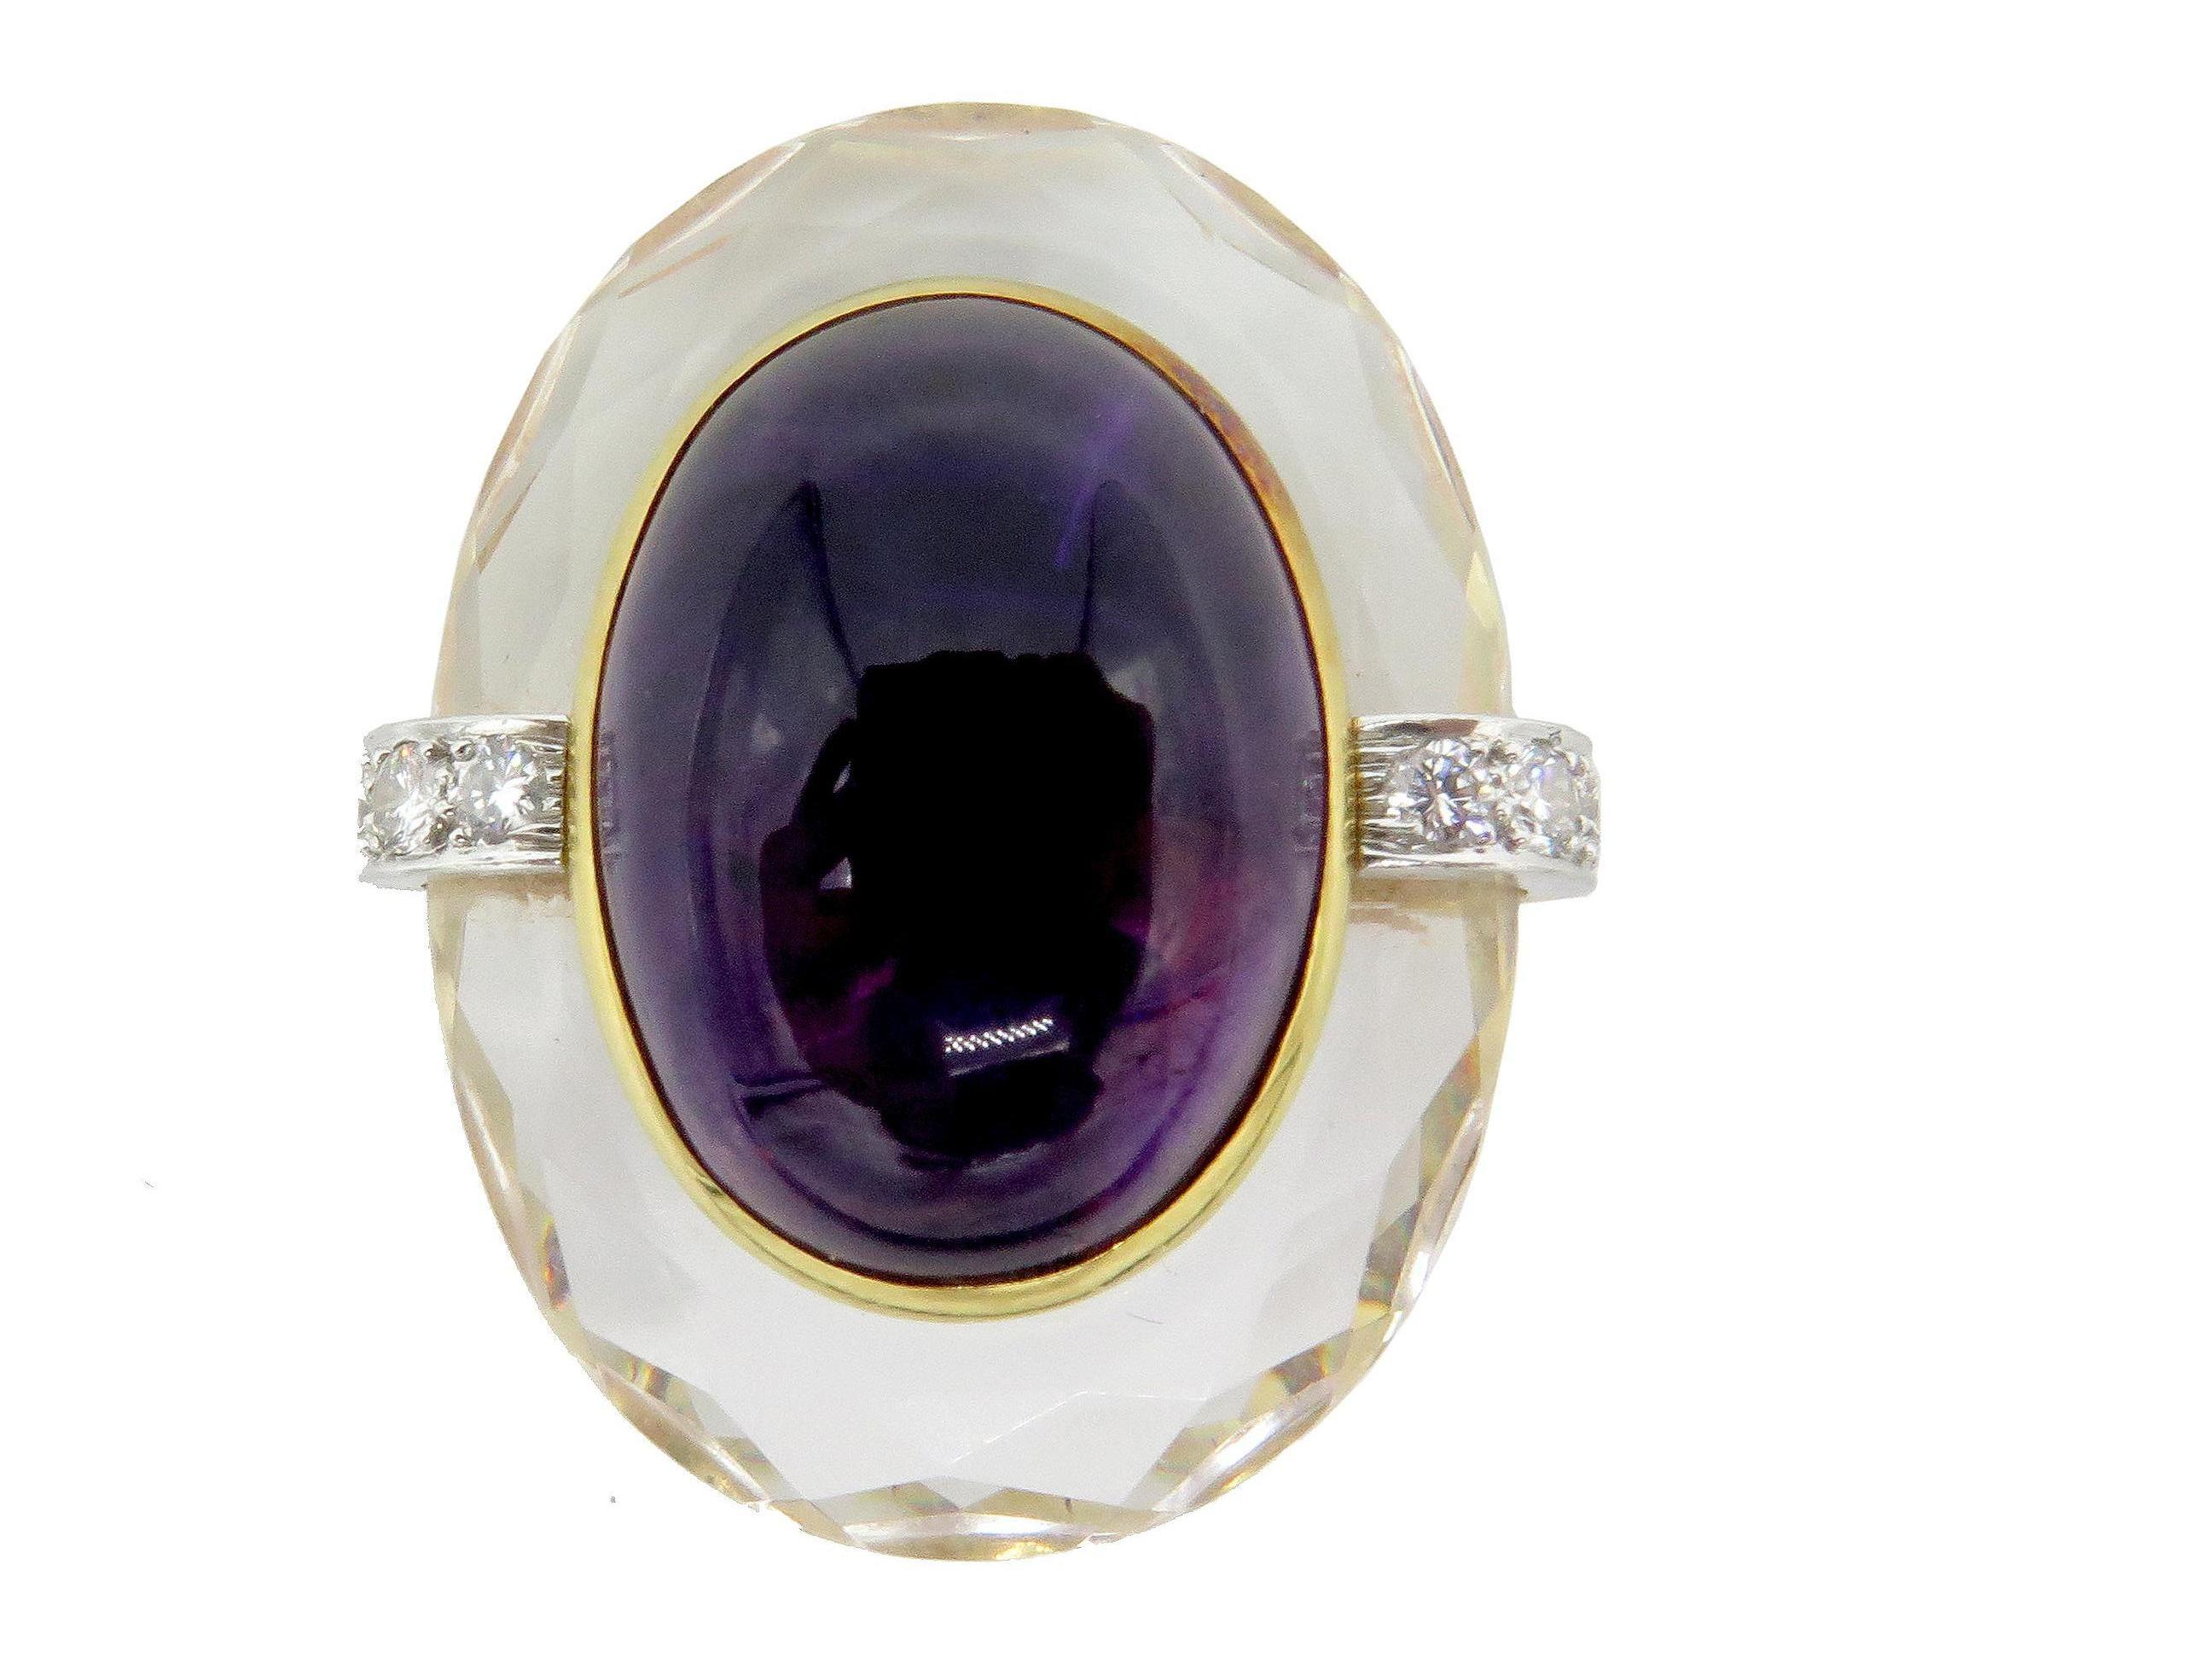 Beautiful, two-tone 18kt gold Amethyst & Diamond clip-on earrings by David Webb. These, beautiful Rock Crystal earrings weigh 41 grams and are 1.3